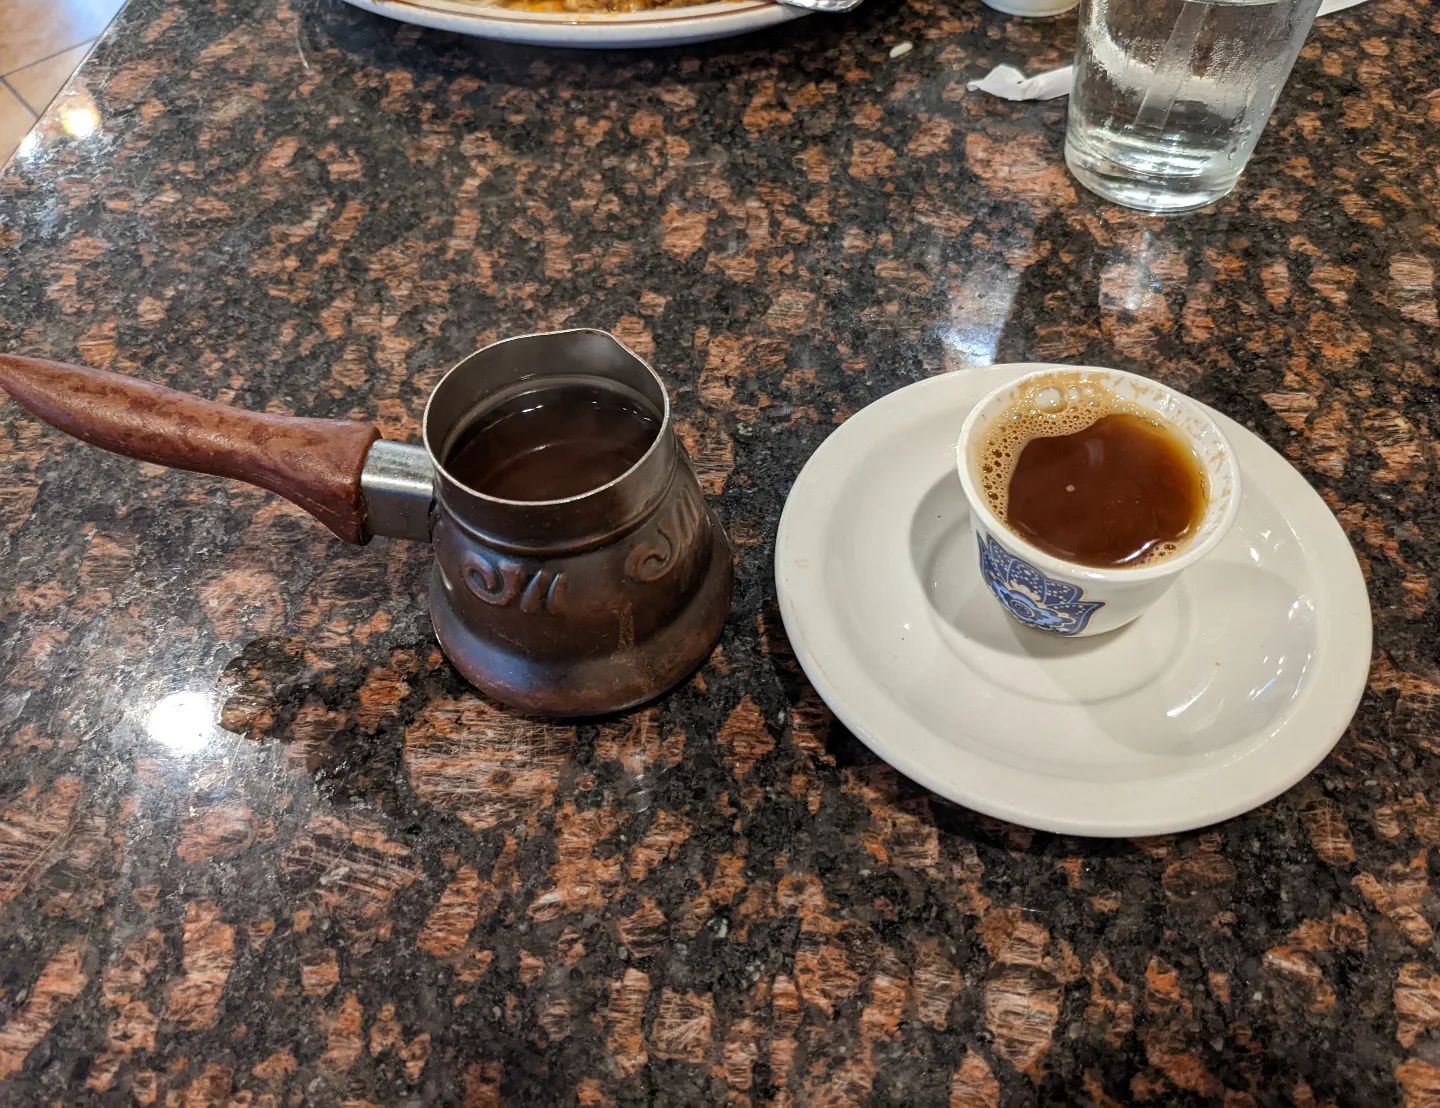 I didn't finish the shawarma... But one can't leave without the traditional 3 shots of Arabic coffee... #foodporn